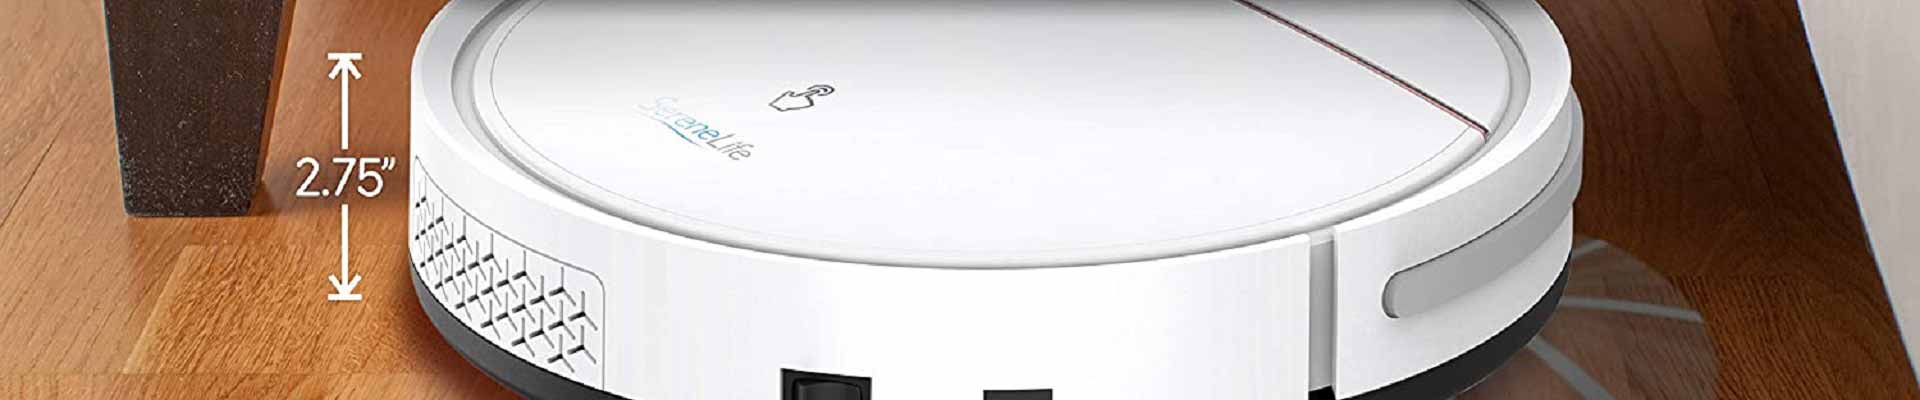 SereneLife-Smart-Automatic-Robot-Cleaner-opz